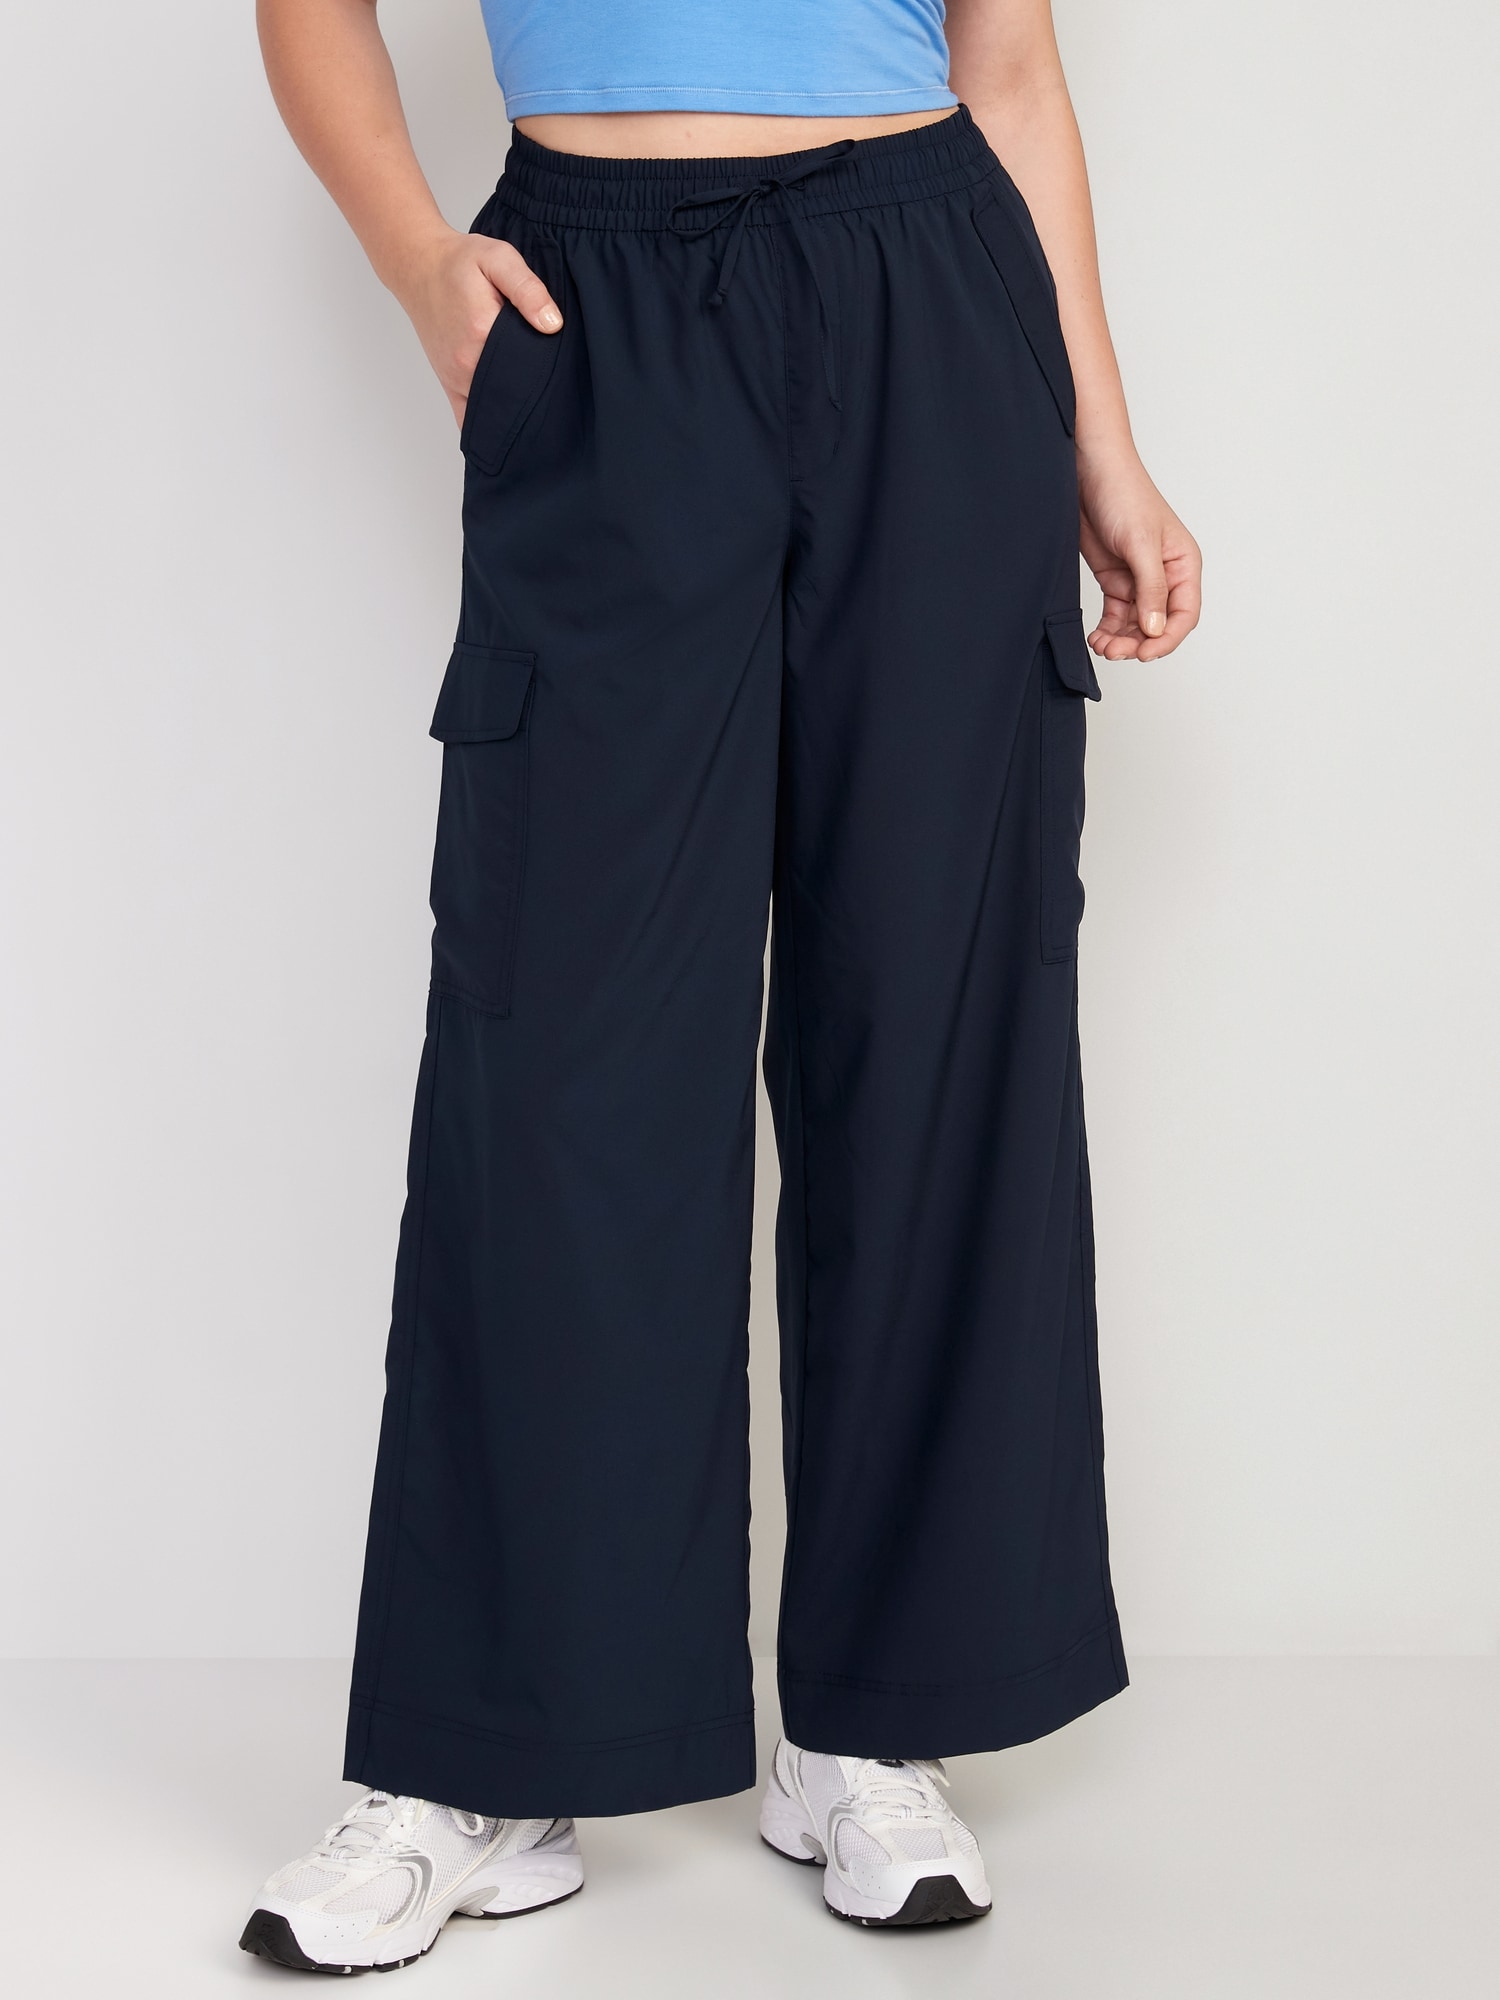 Curves Black Formal Wide Leg Cargo Trousers | New Look